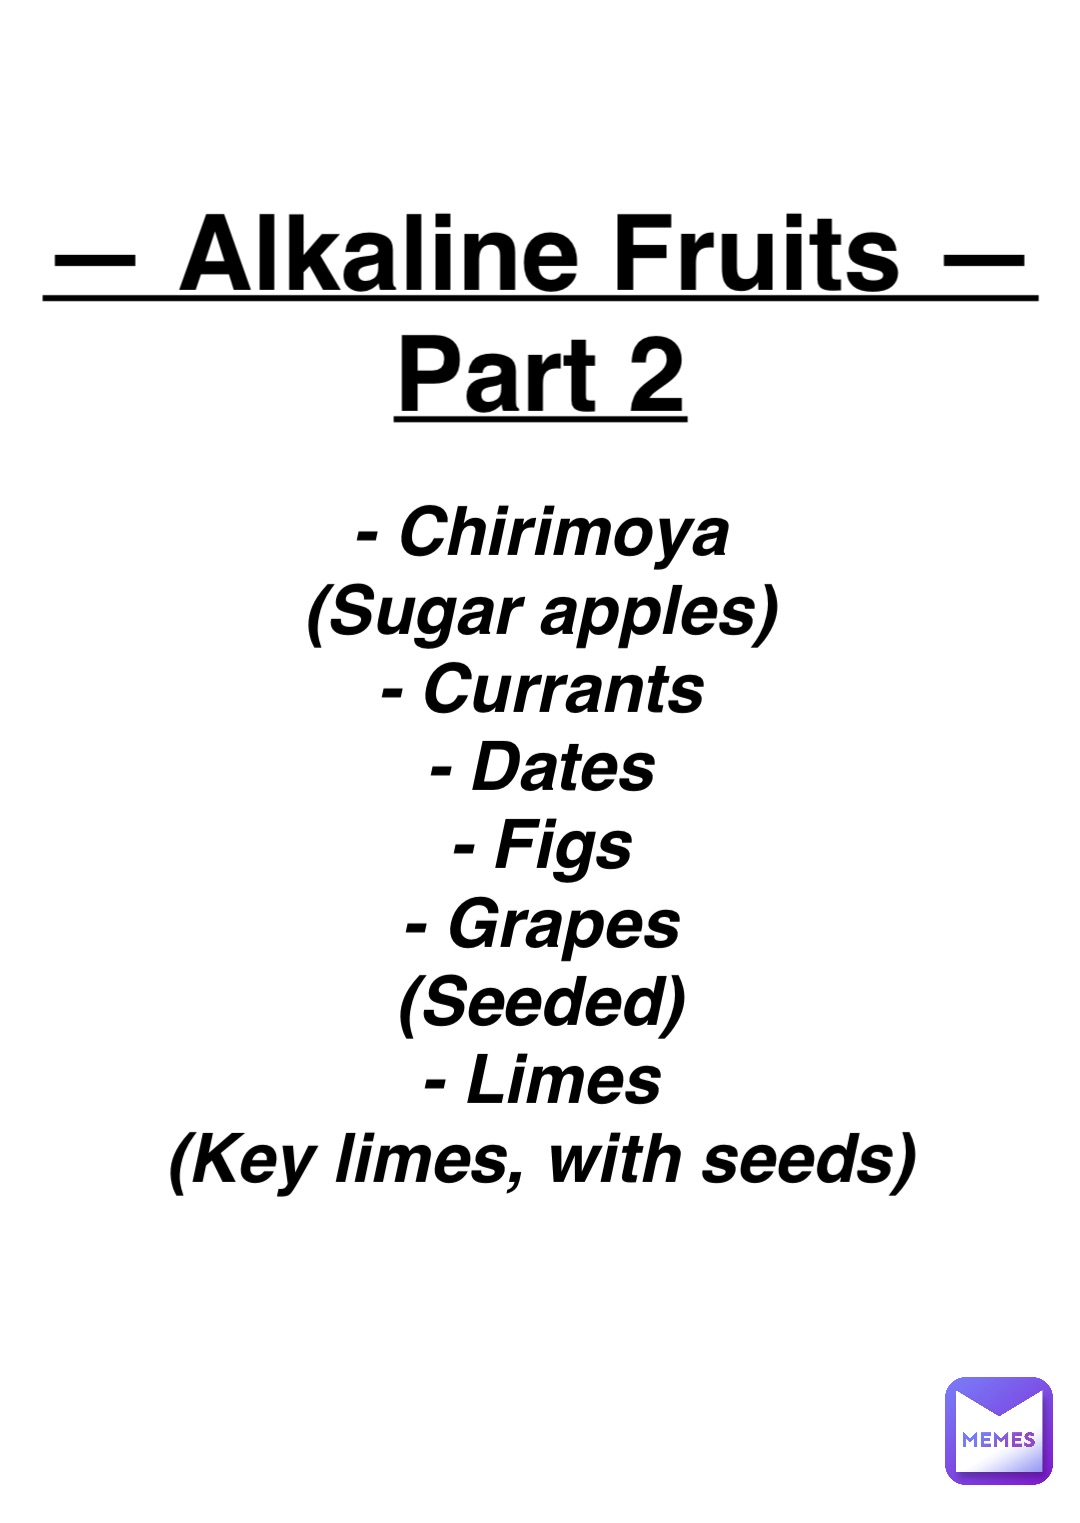 Double tap to edit — Alkaline Fruits —
Part 2 - Chirimoya
(Sugar apples)
- Currants
- Dates
- Figs
- Grapes
(Seeded)
- Limes
(Key limes, with seeds)